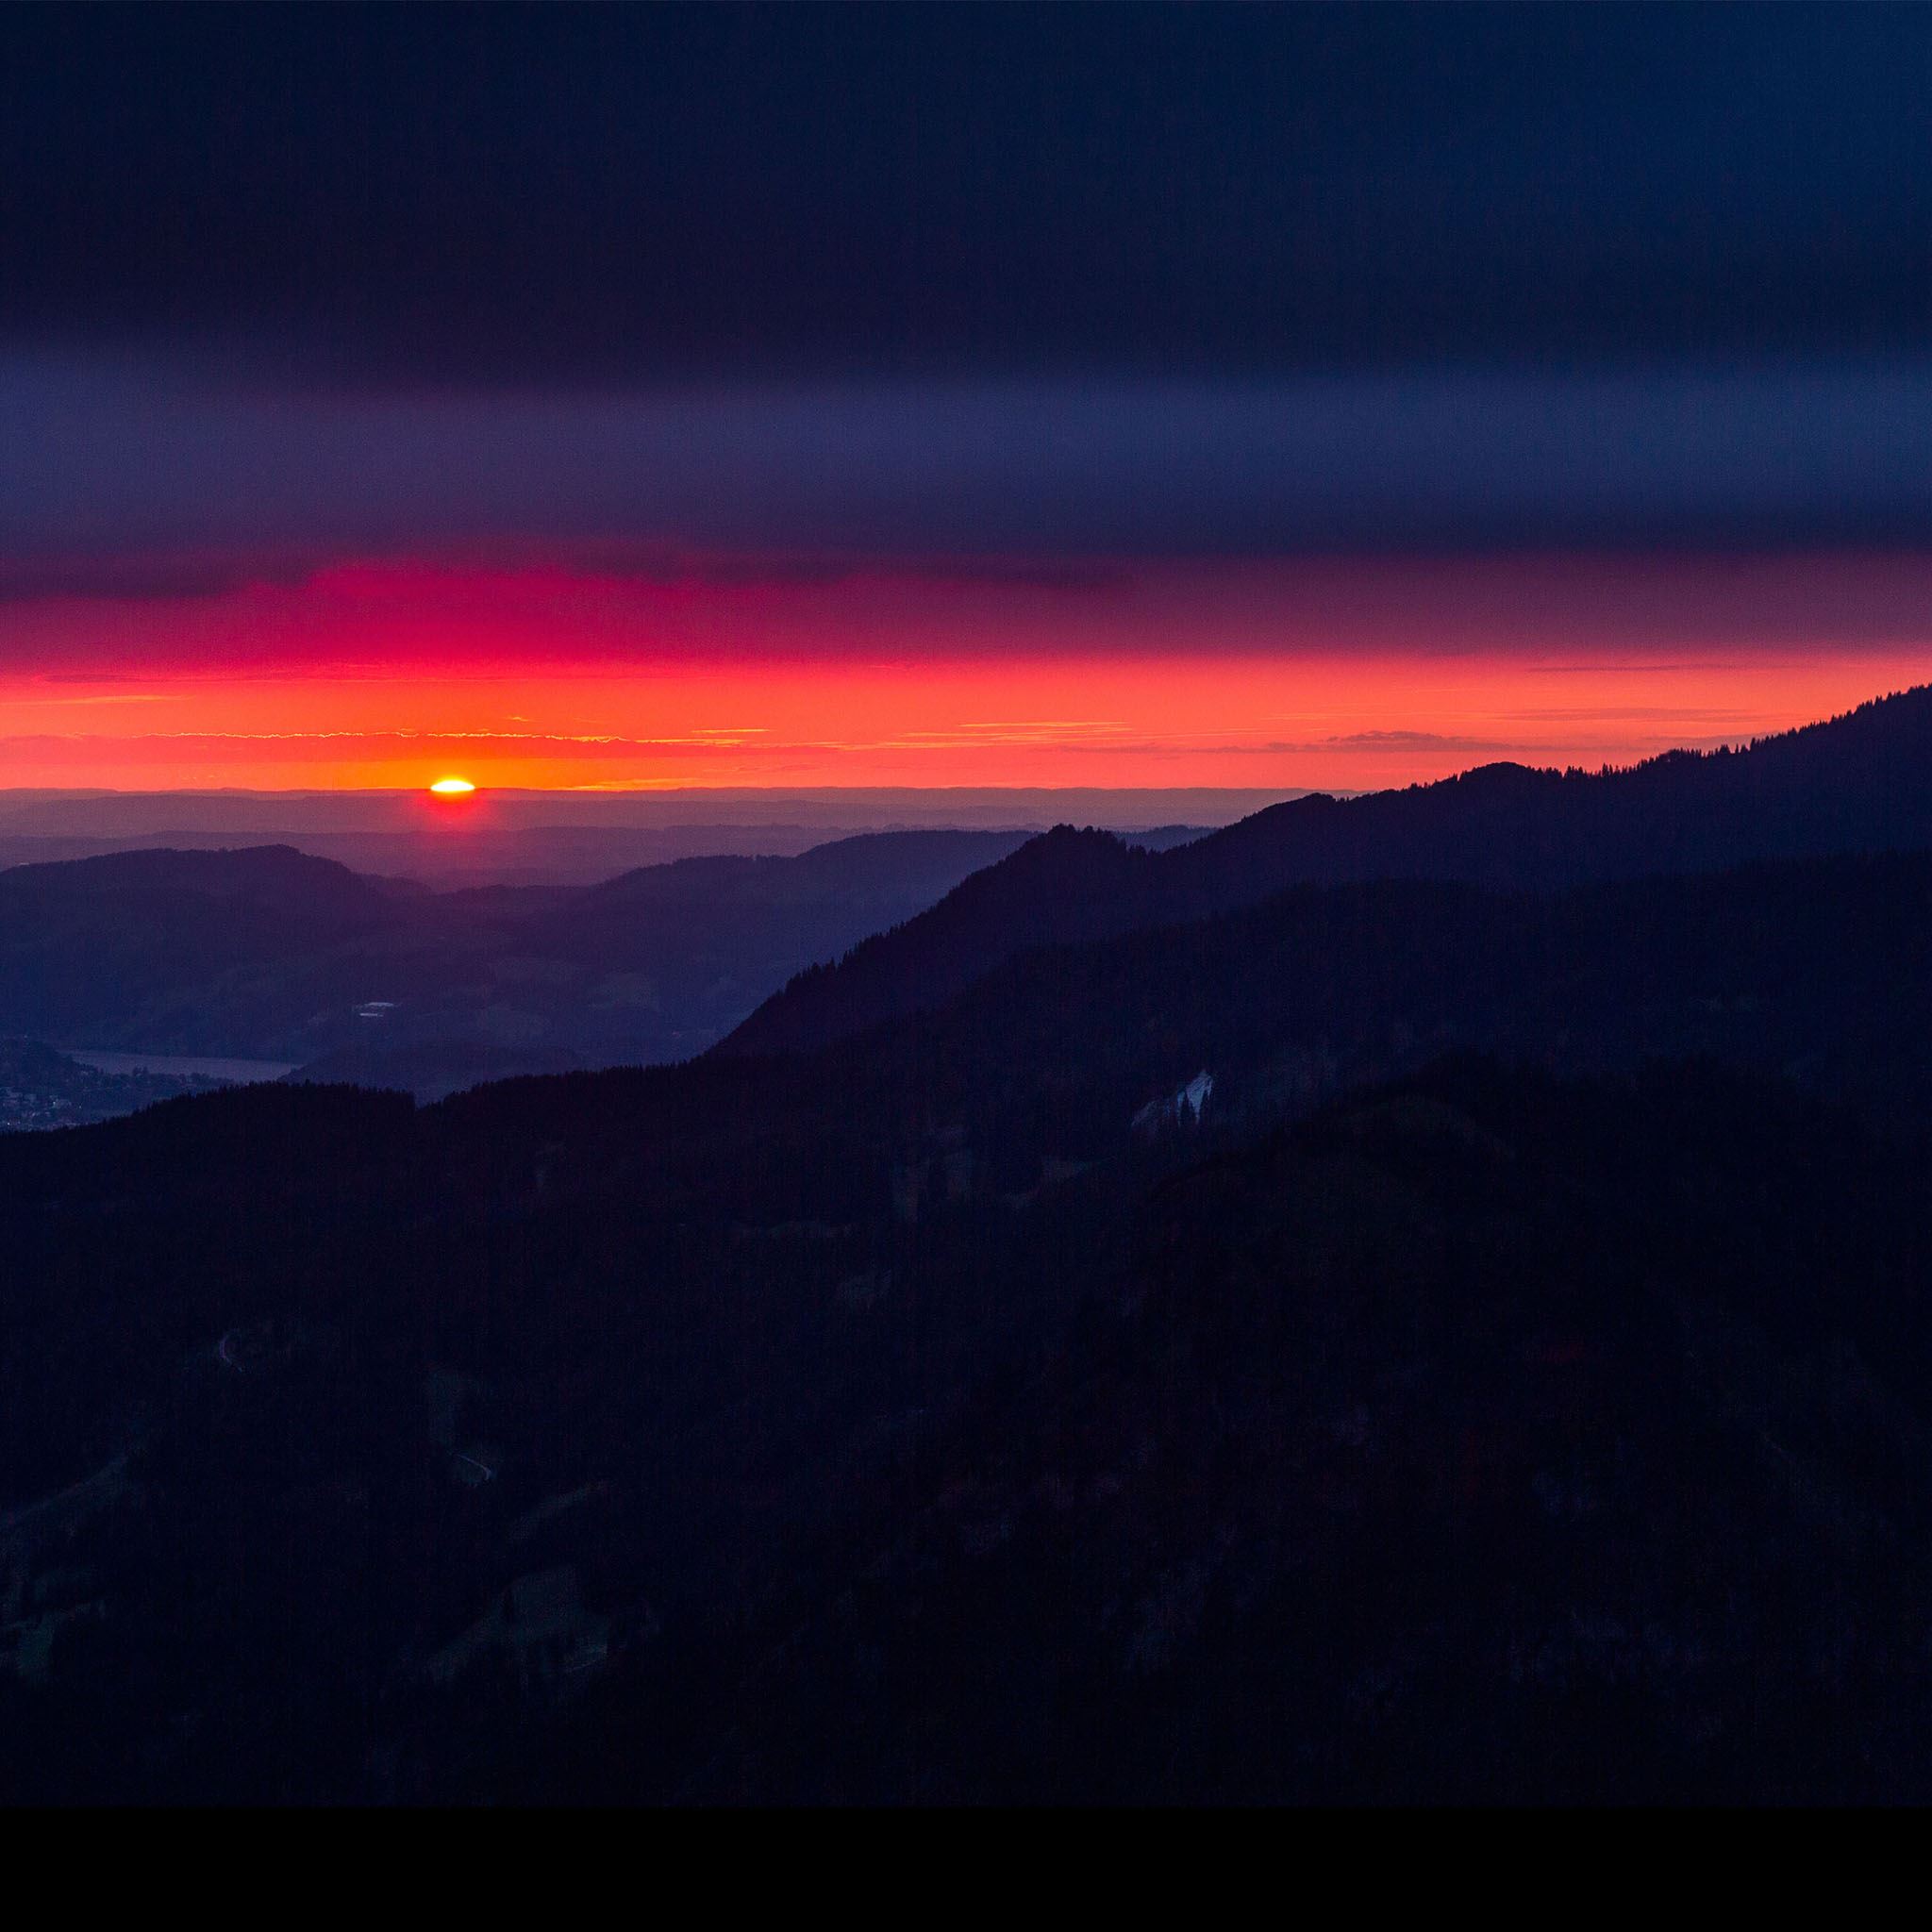 Dark Night Sunset Mountain Sky View Landscape Ipad Air Wallpapers Free